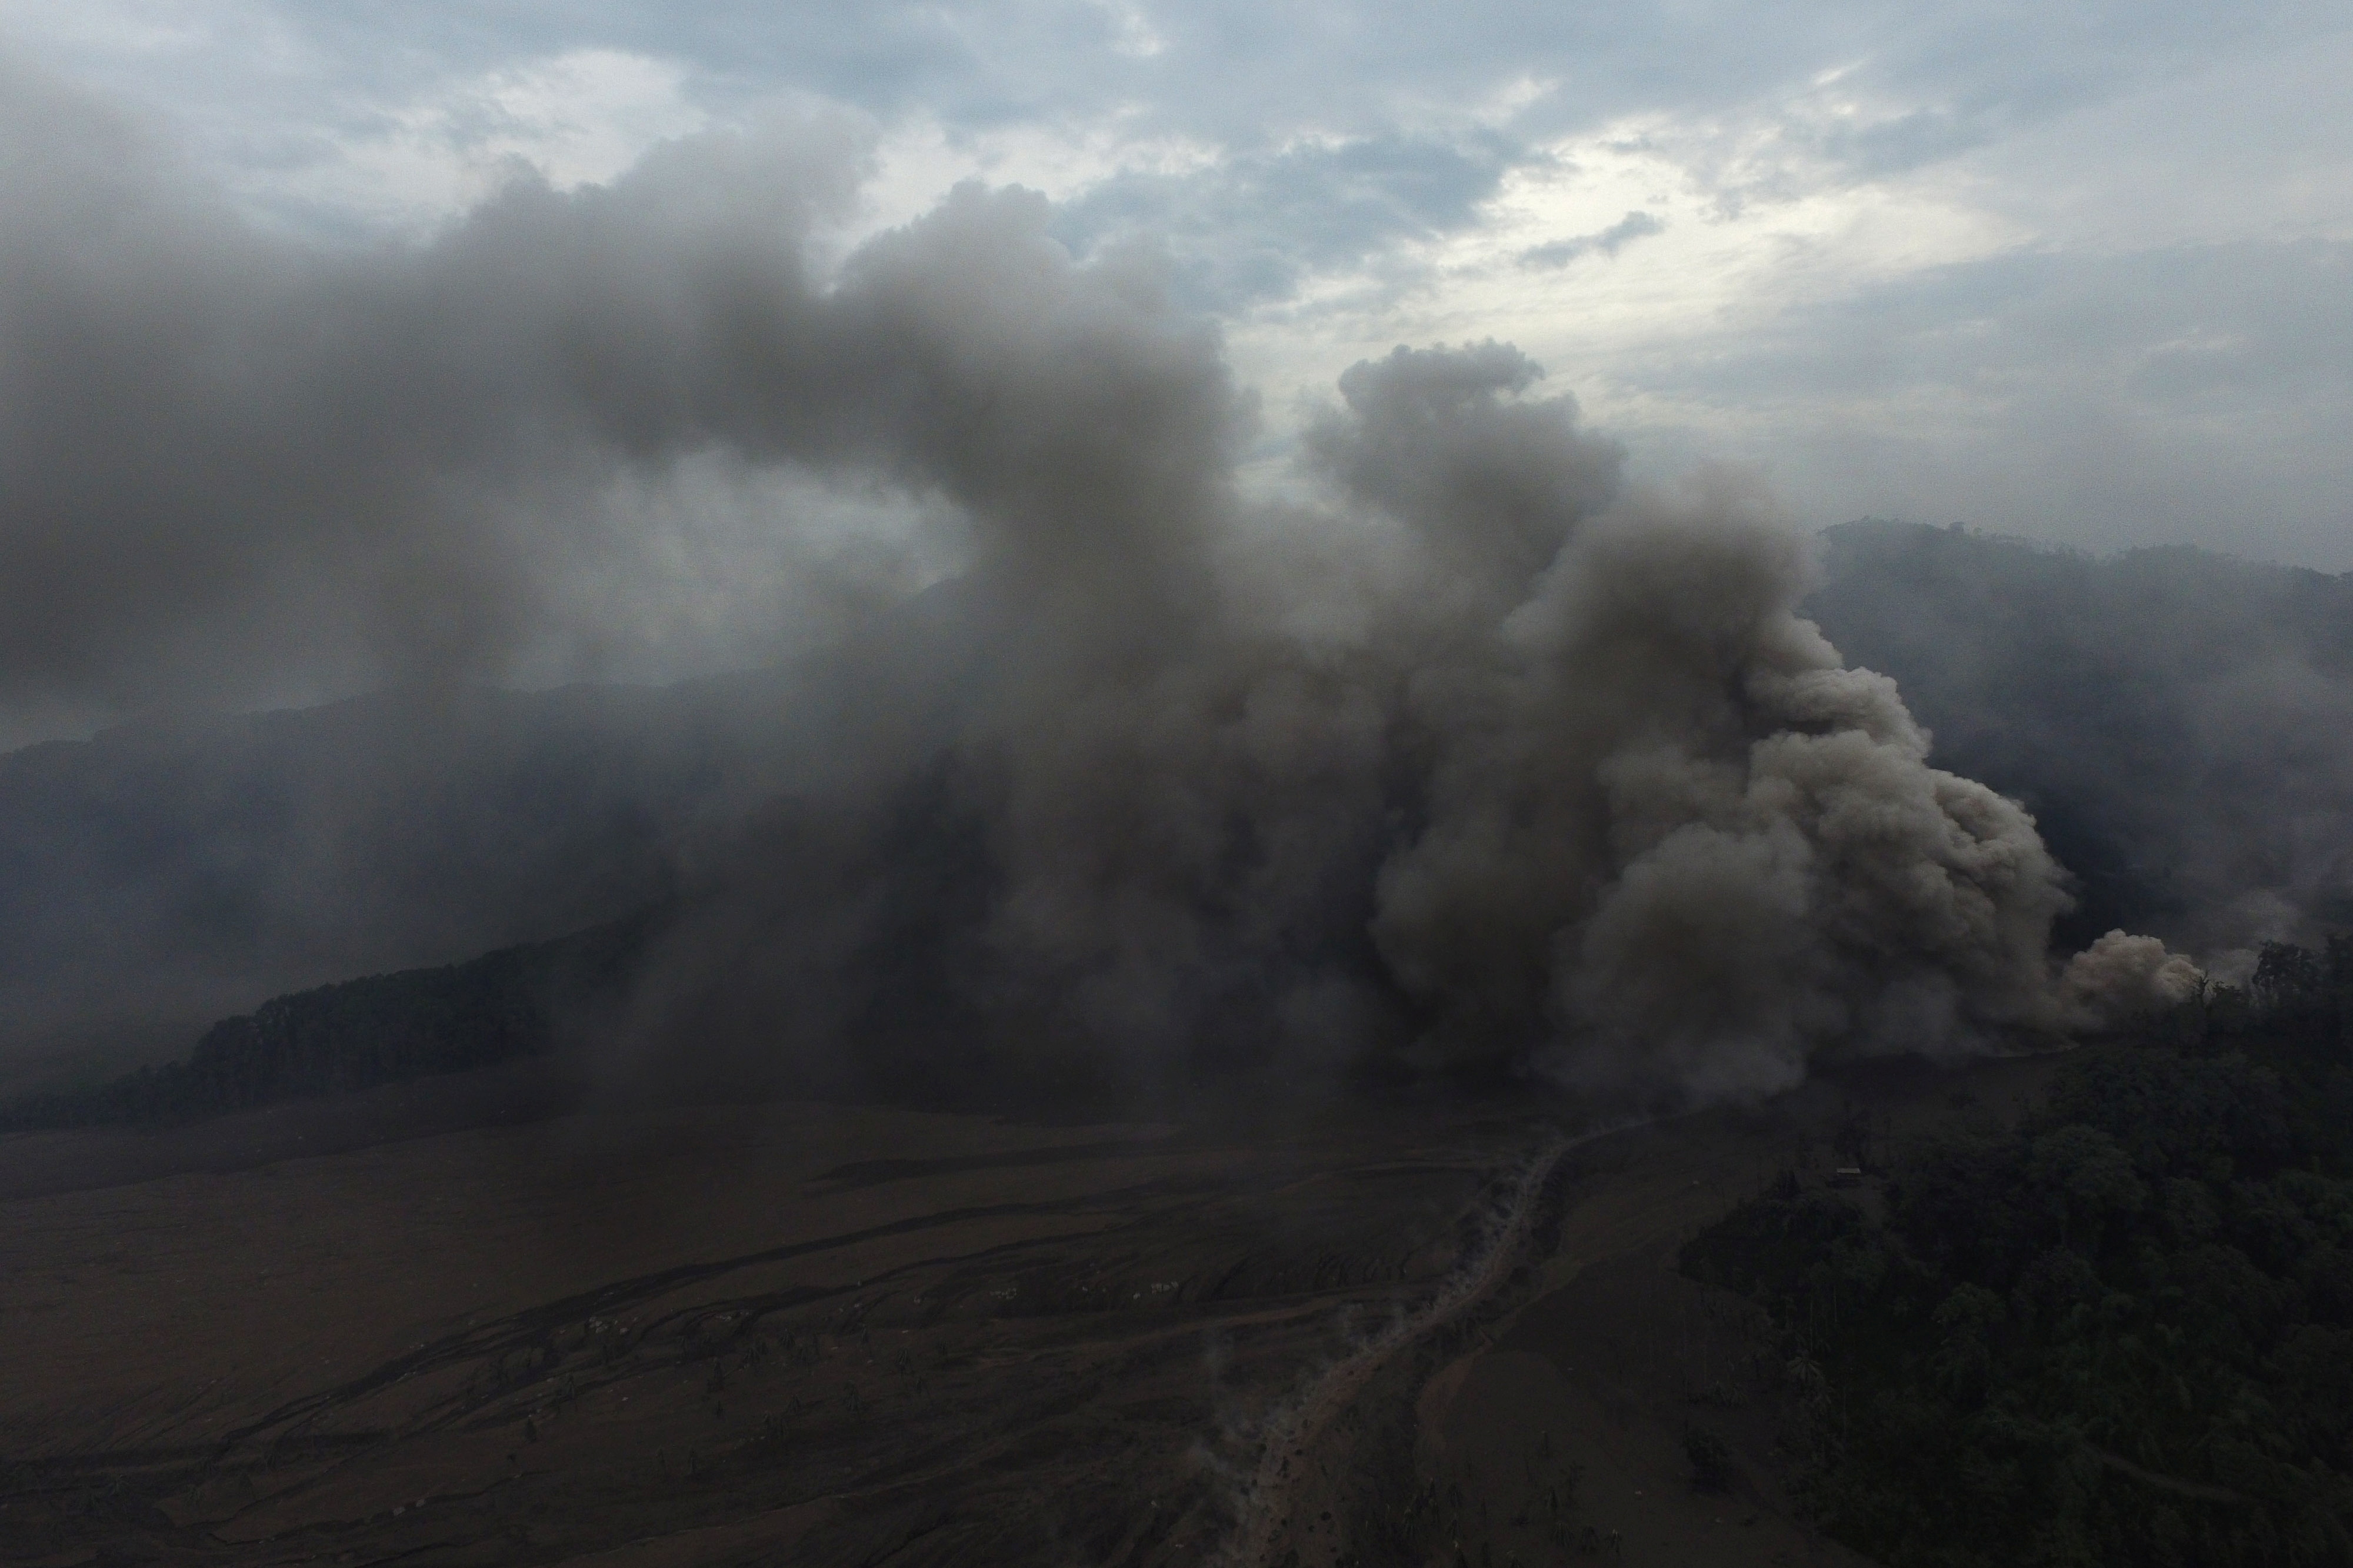 An aerial view shows volcanic ash rising affected by the Mount Semeru volcano during an eruption in Sumber Wuluh village